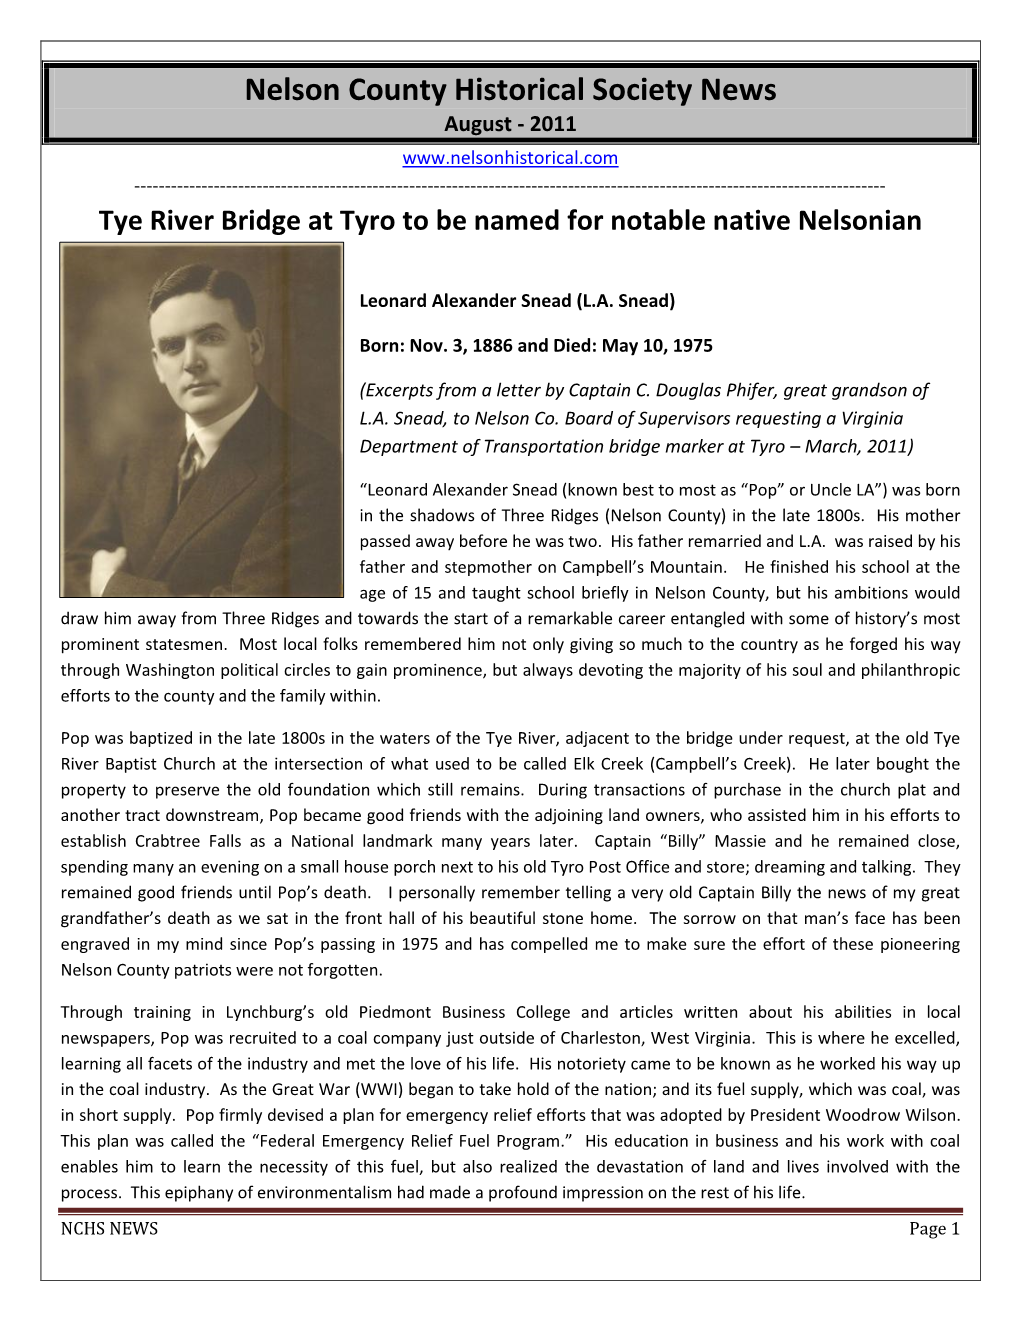 Nelson County Historical Society News August - 2011 ------Tye River Bridge at Tyro to Be Named for Notable Native Nelsonian